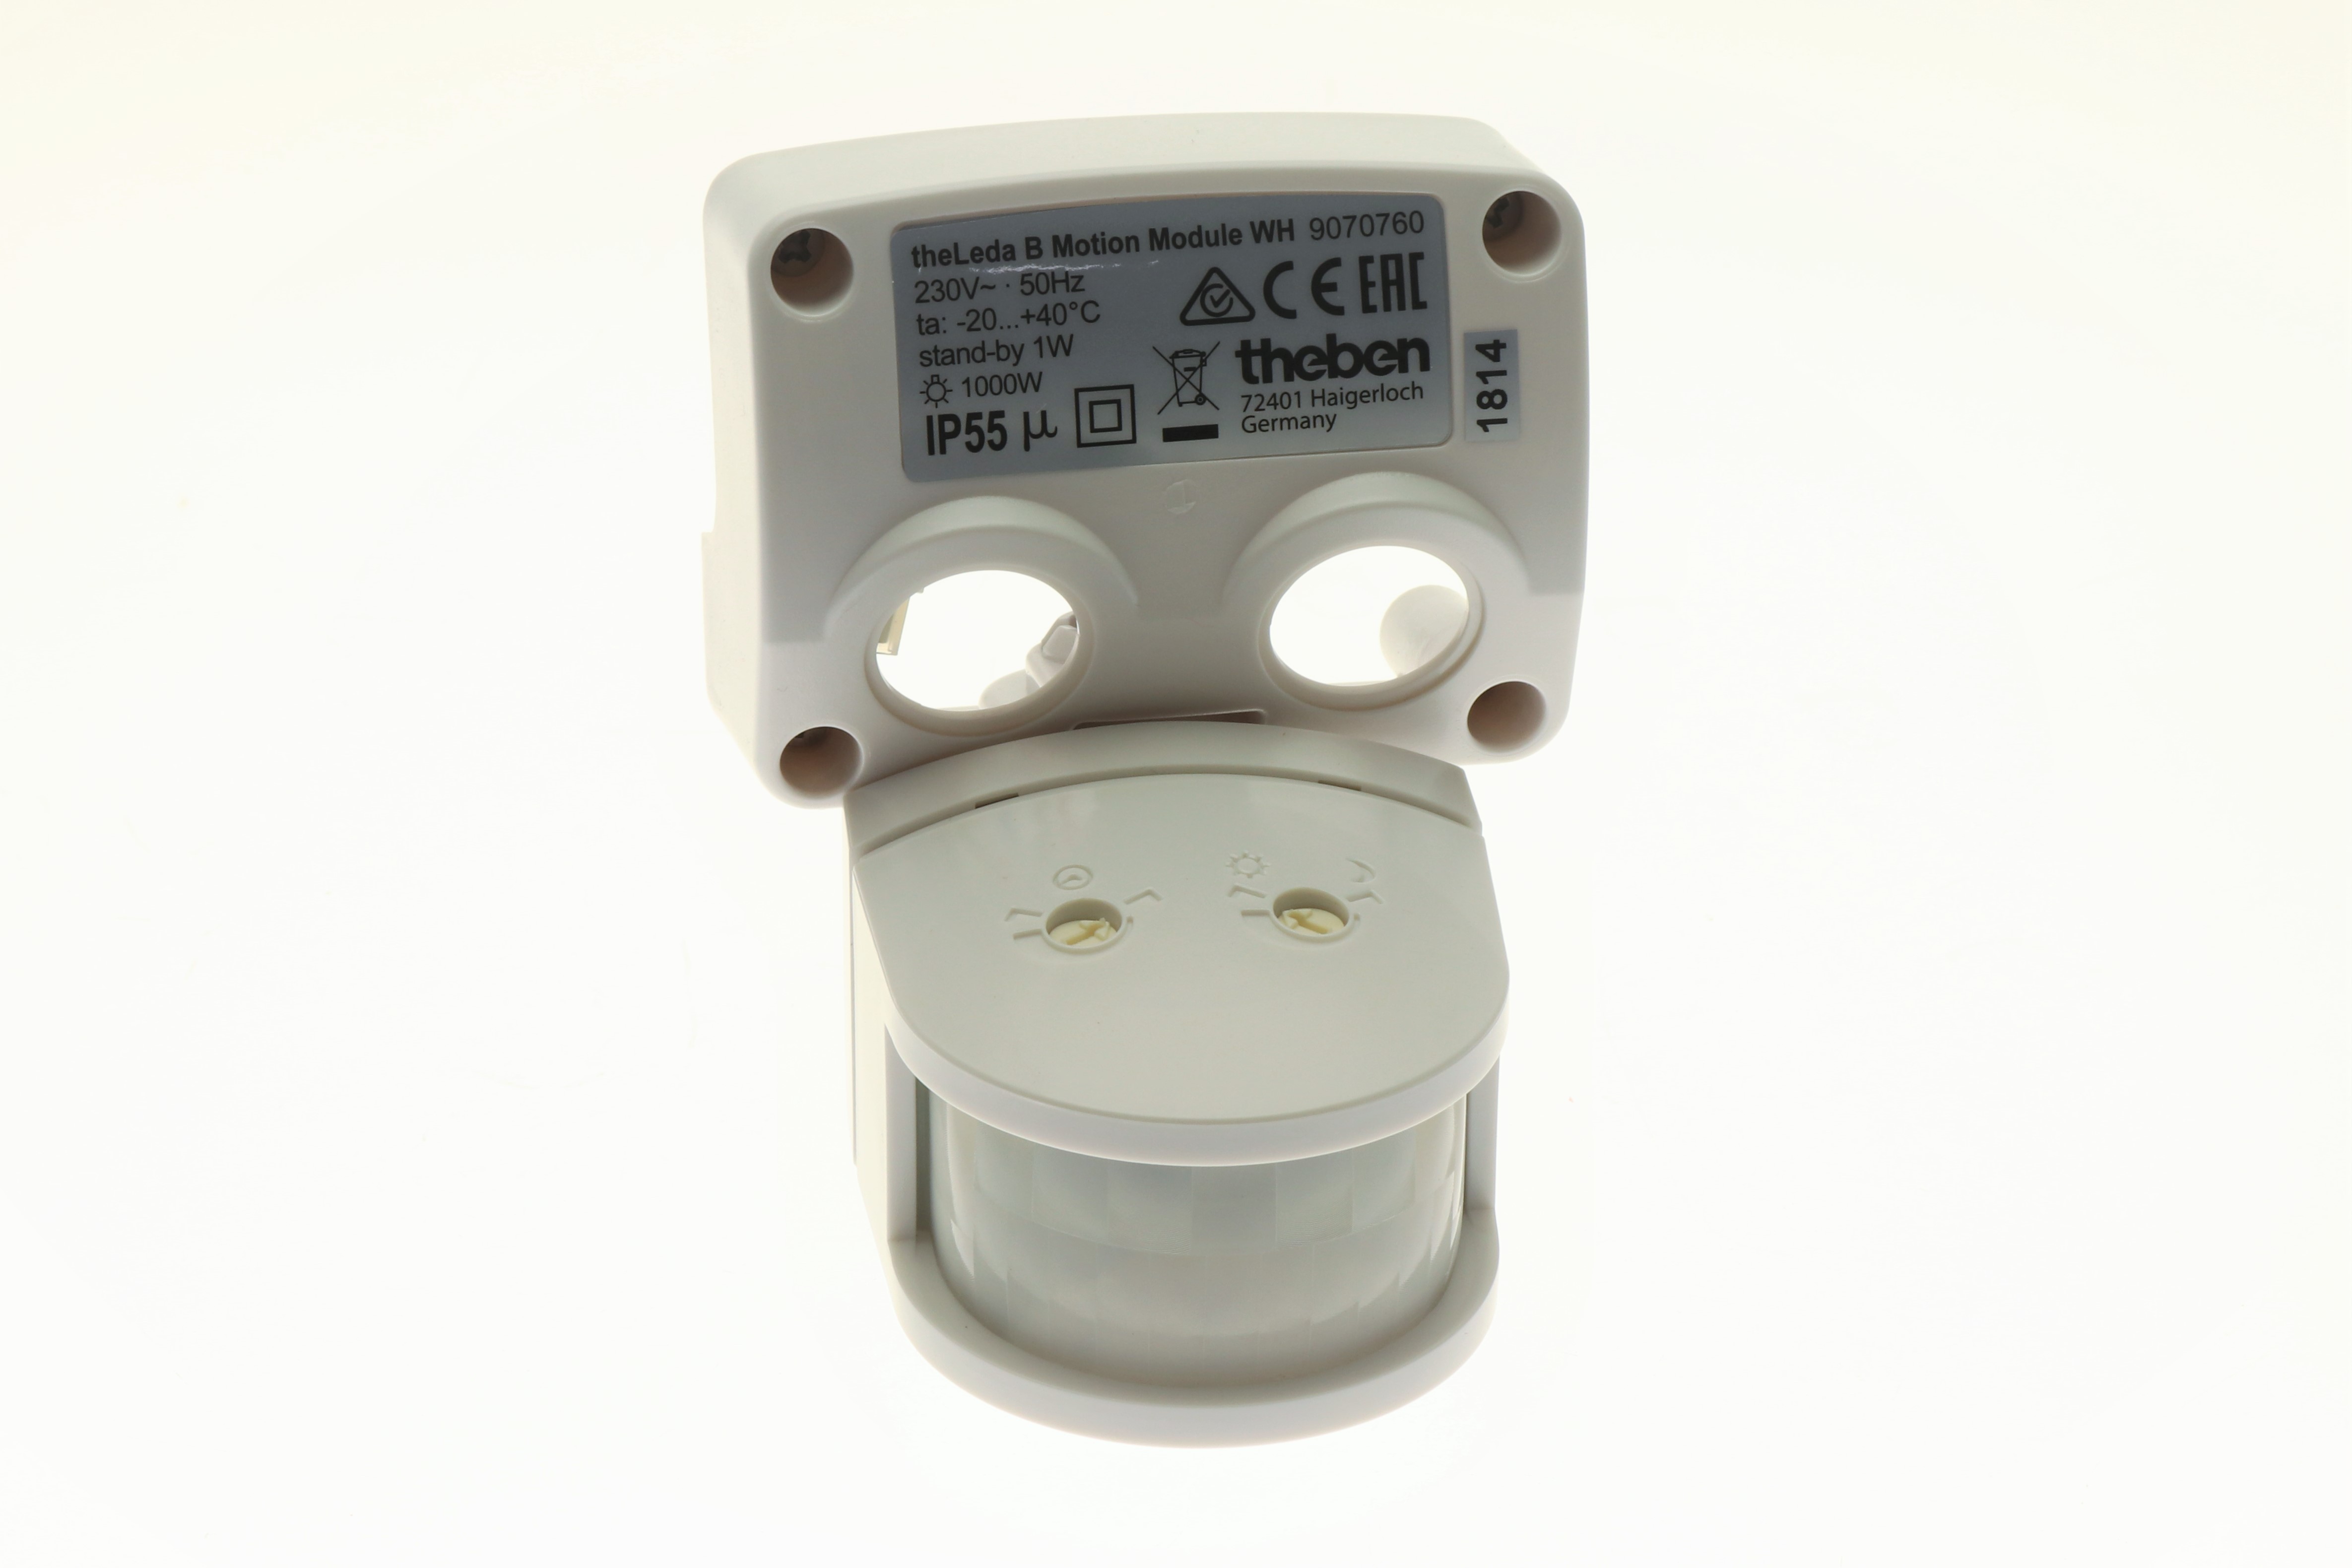 Theben motion detector theLeda B Motion Module WH